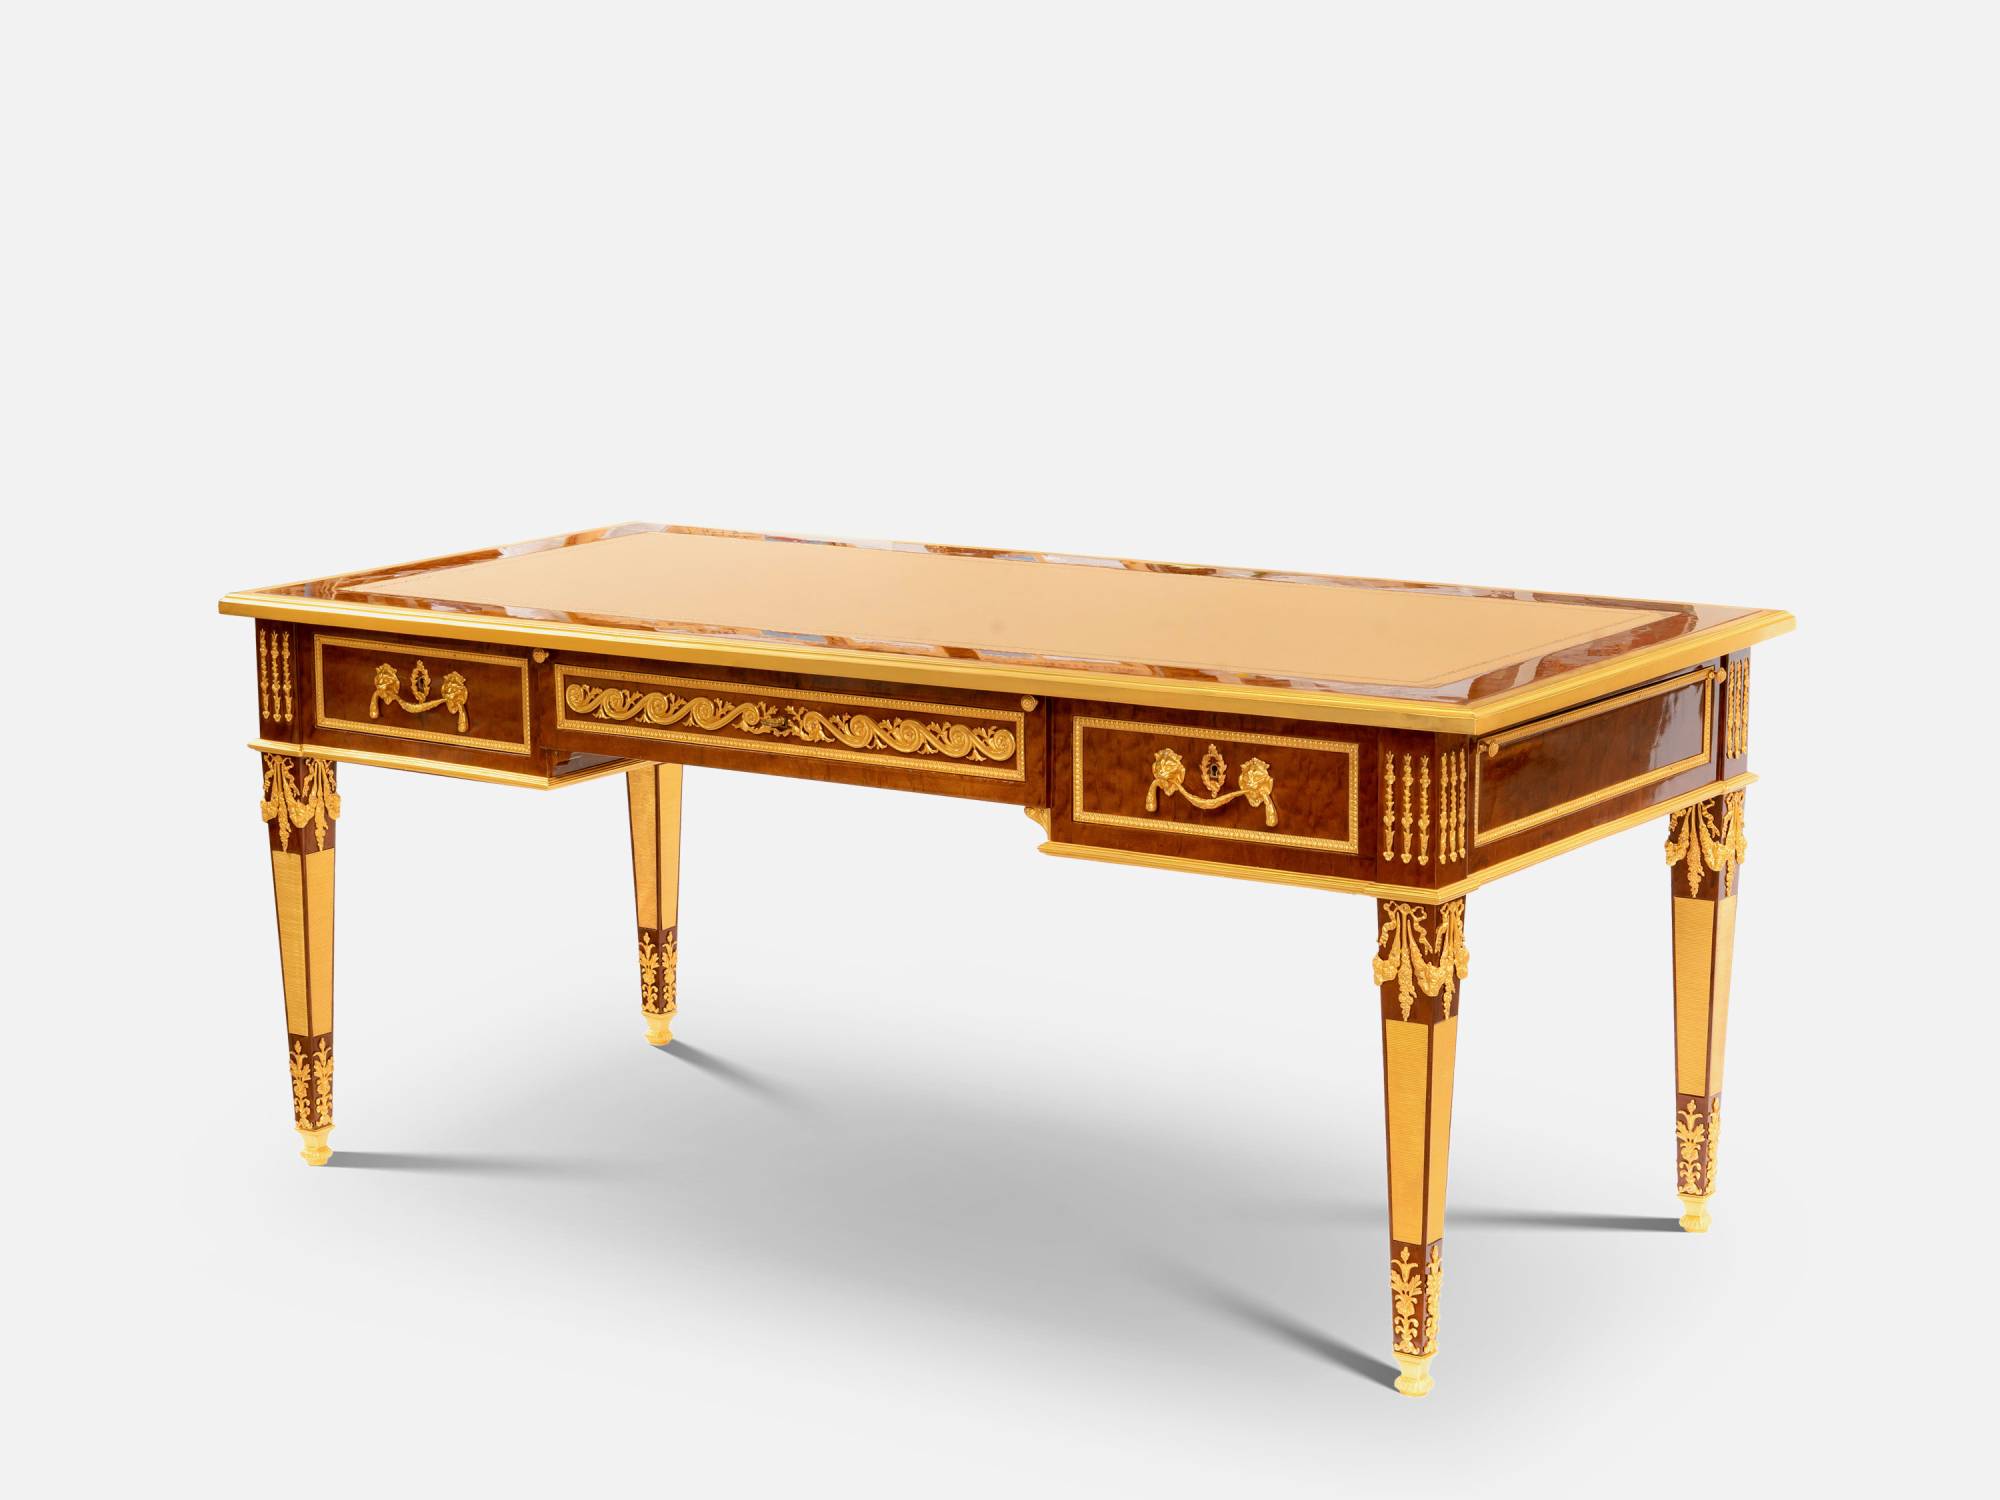 ART. 2291 - C.G. Capelletti quality furniture with made in Italy contemporary Desks and writing desks